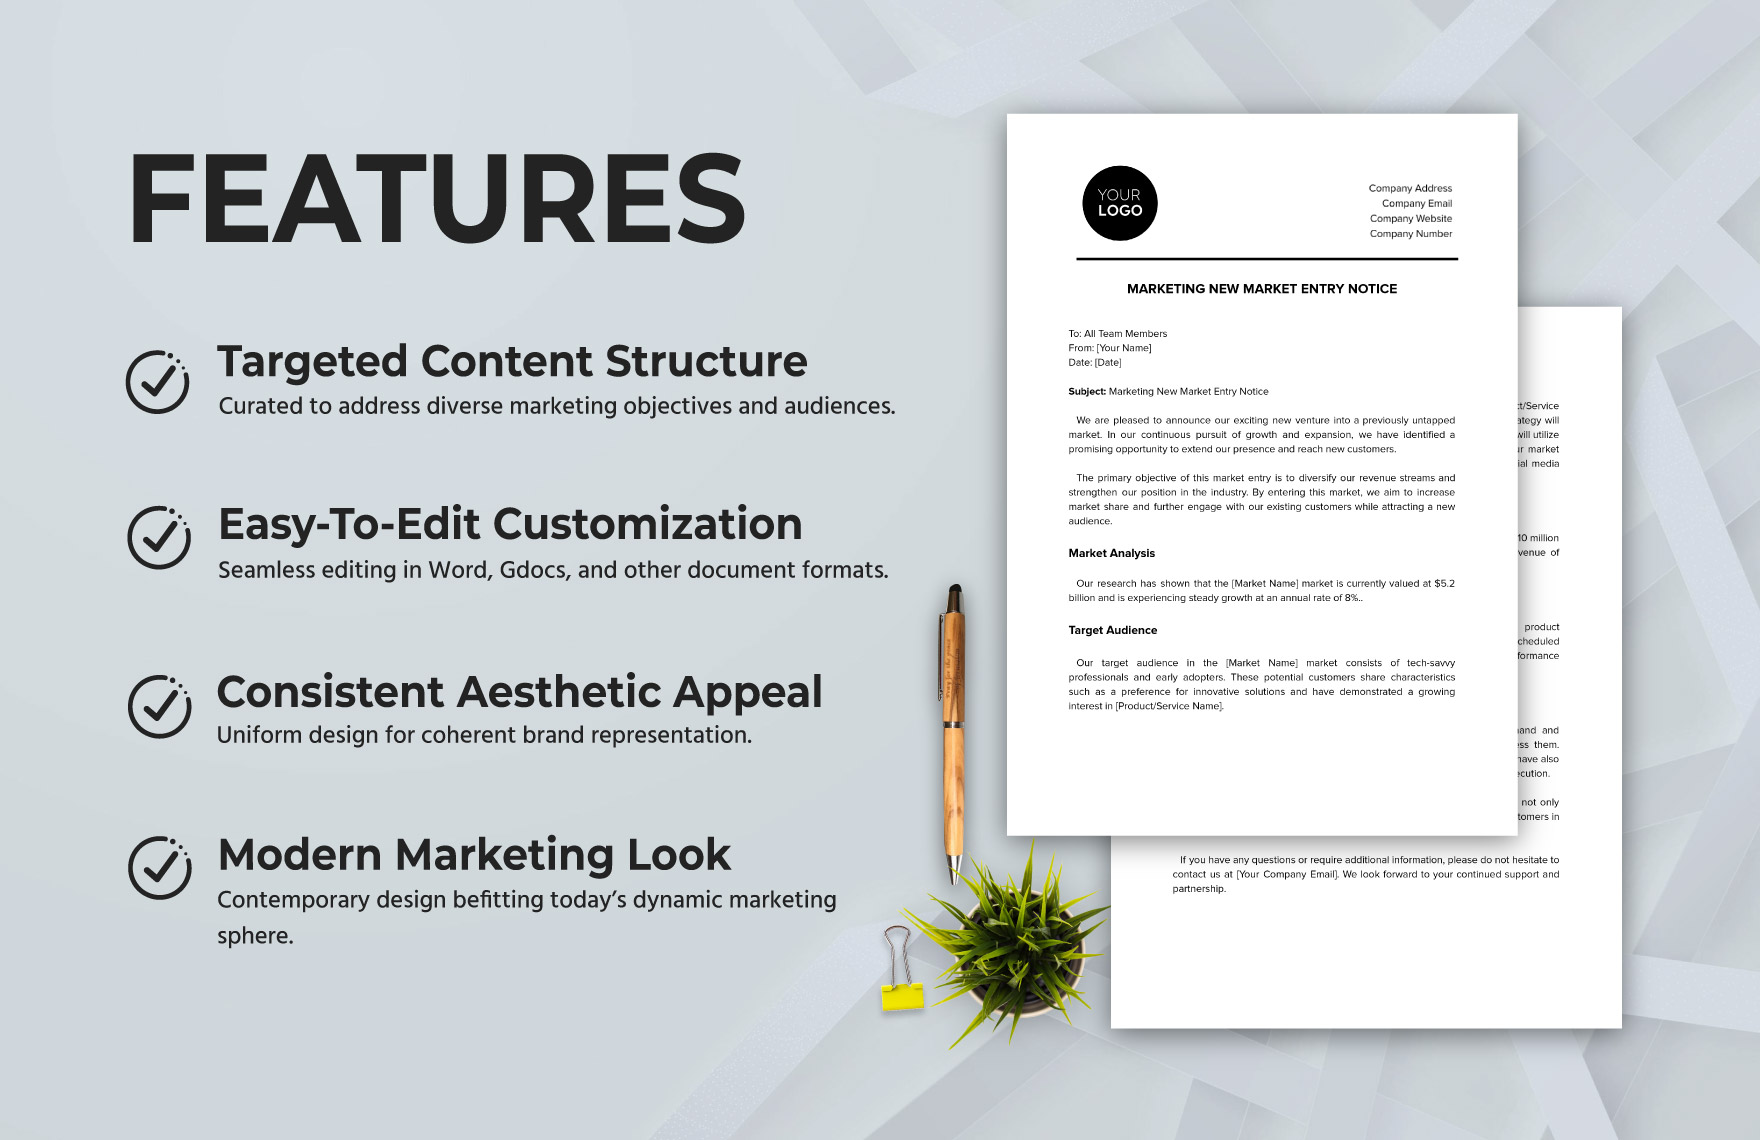  Marketing New Market Entry Notice Template